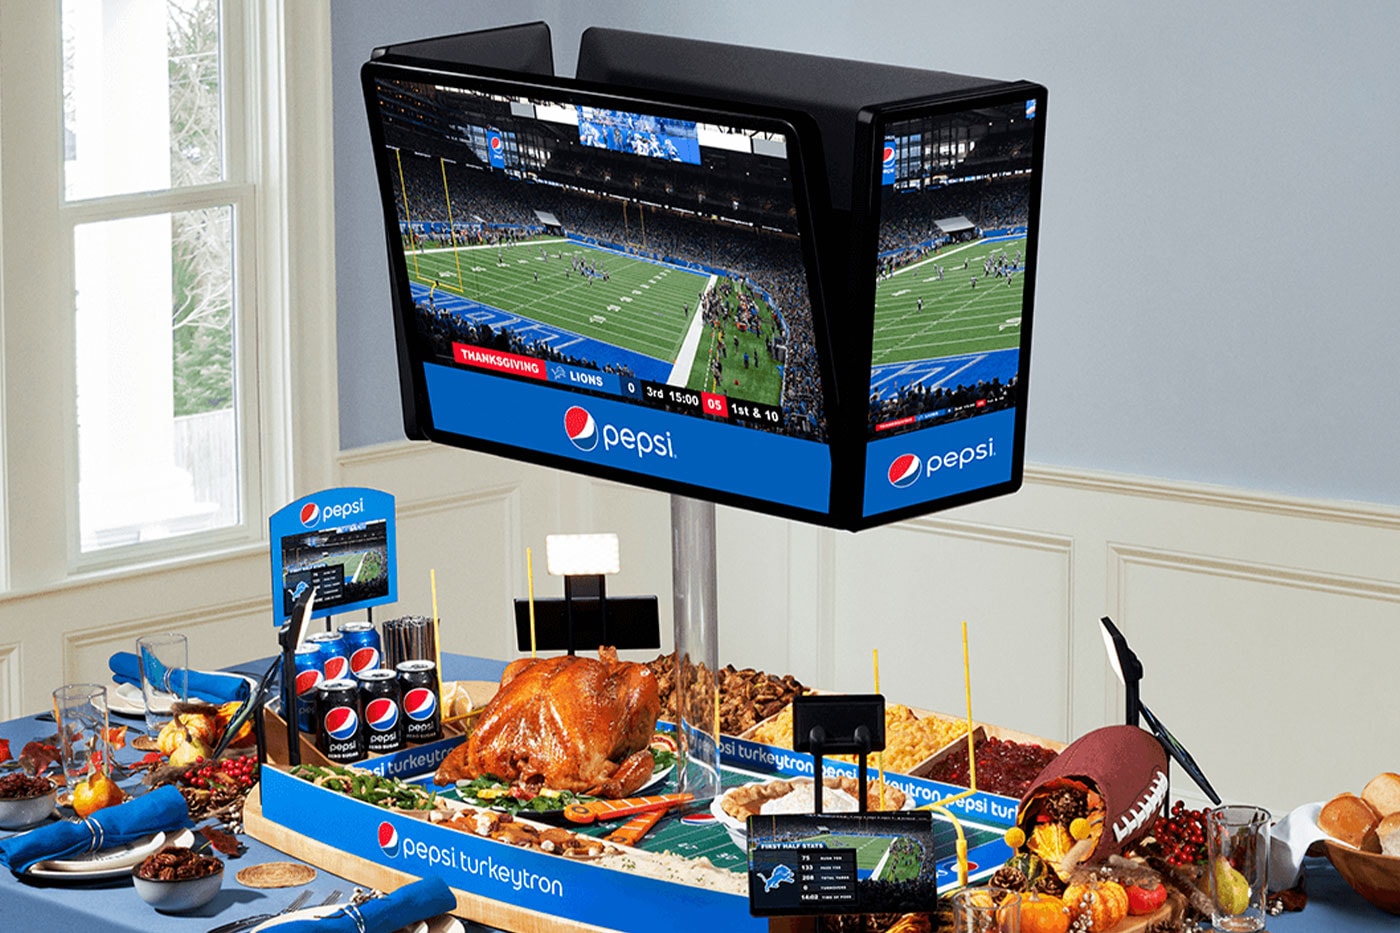 Pepsi Debuts Its Turkeytron Thanksgiving Centerpiece for Football Families Nationwide nfl turkey carving sports football sunday jumbotron 